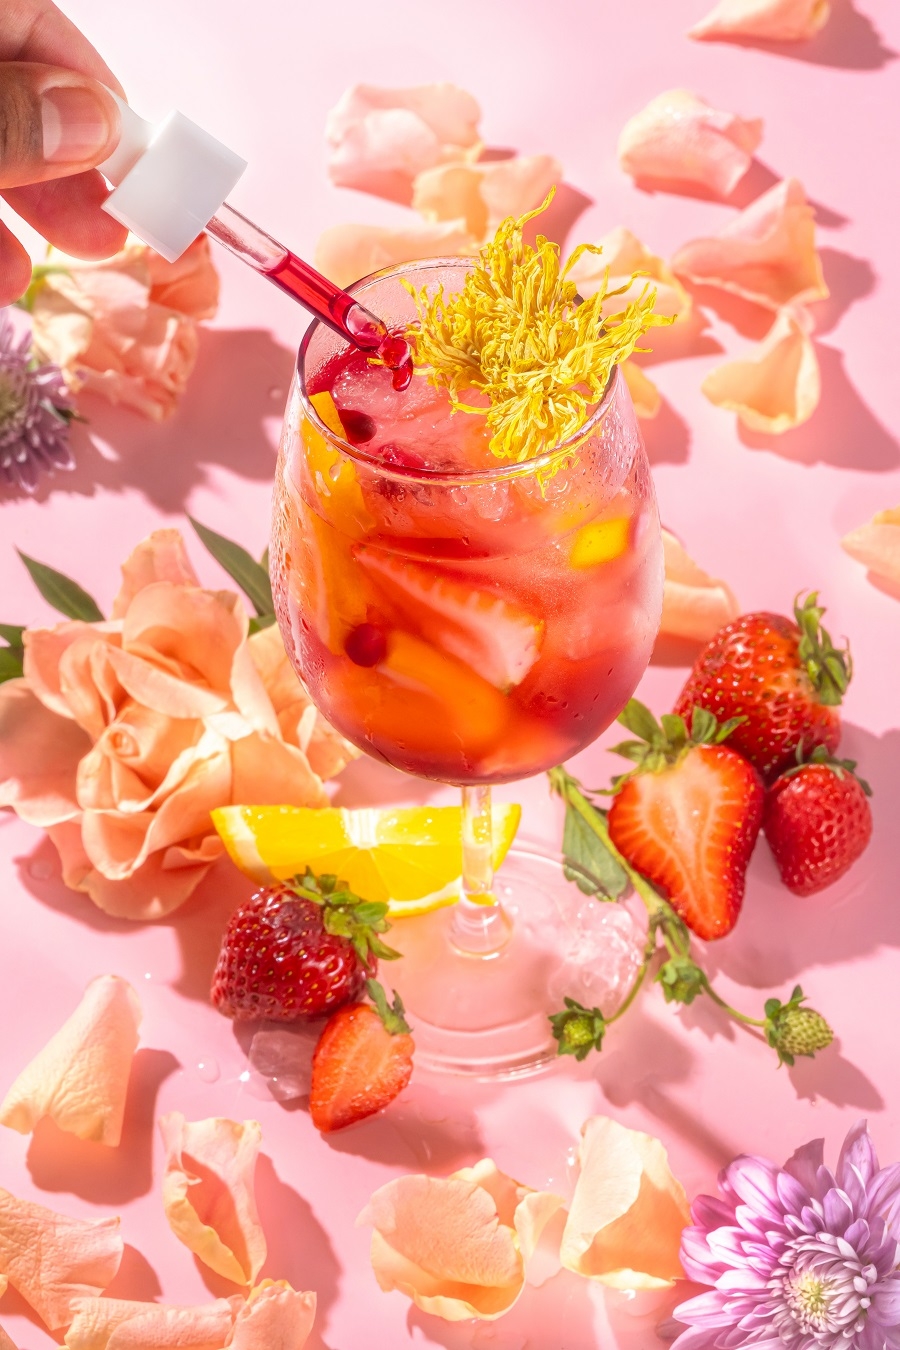 A few drops of Rose Tinted Glasses tincture into a light pink mocktail filled with strawberries and flowers